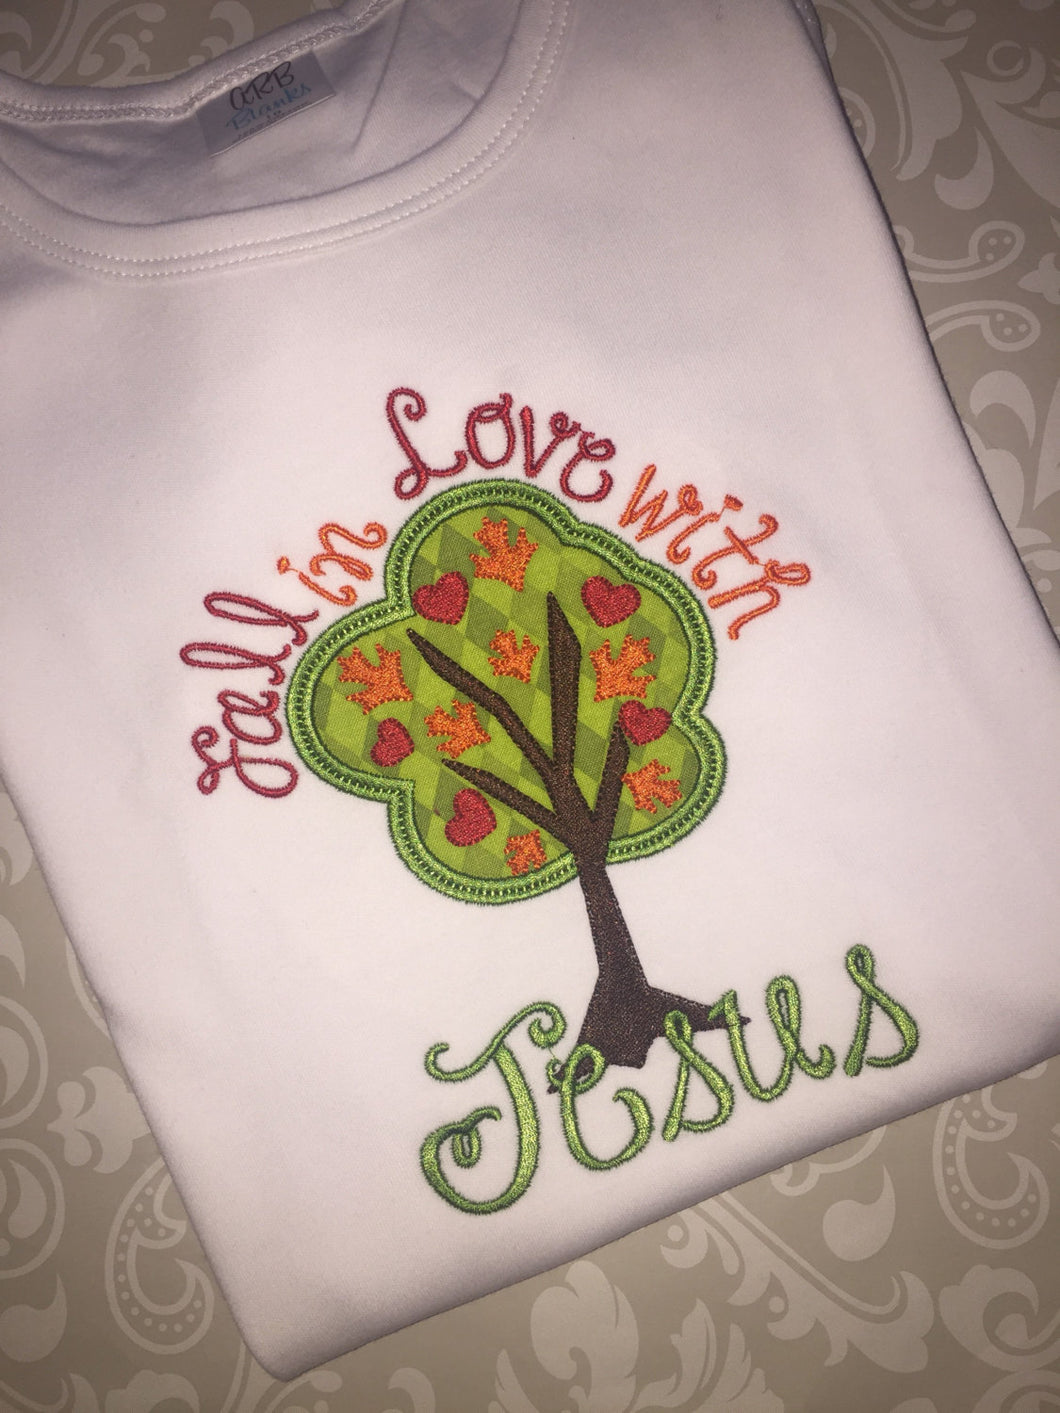 Fall in Love with Jesus tee